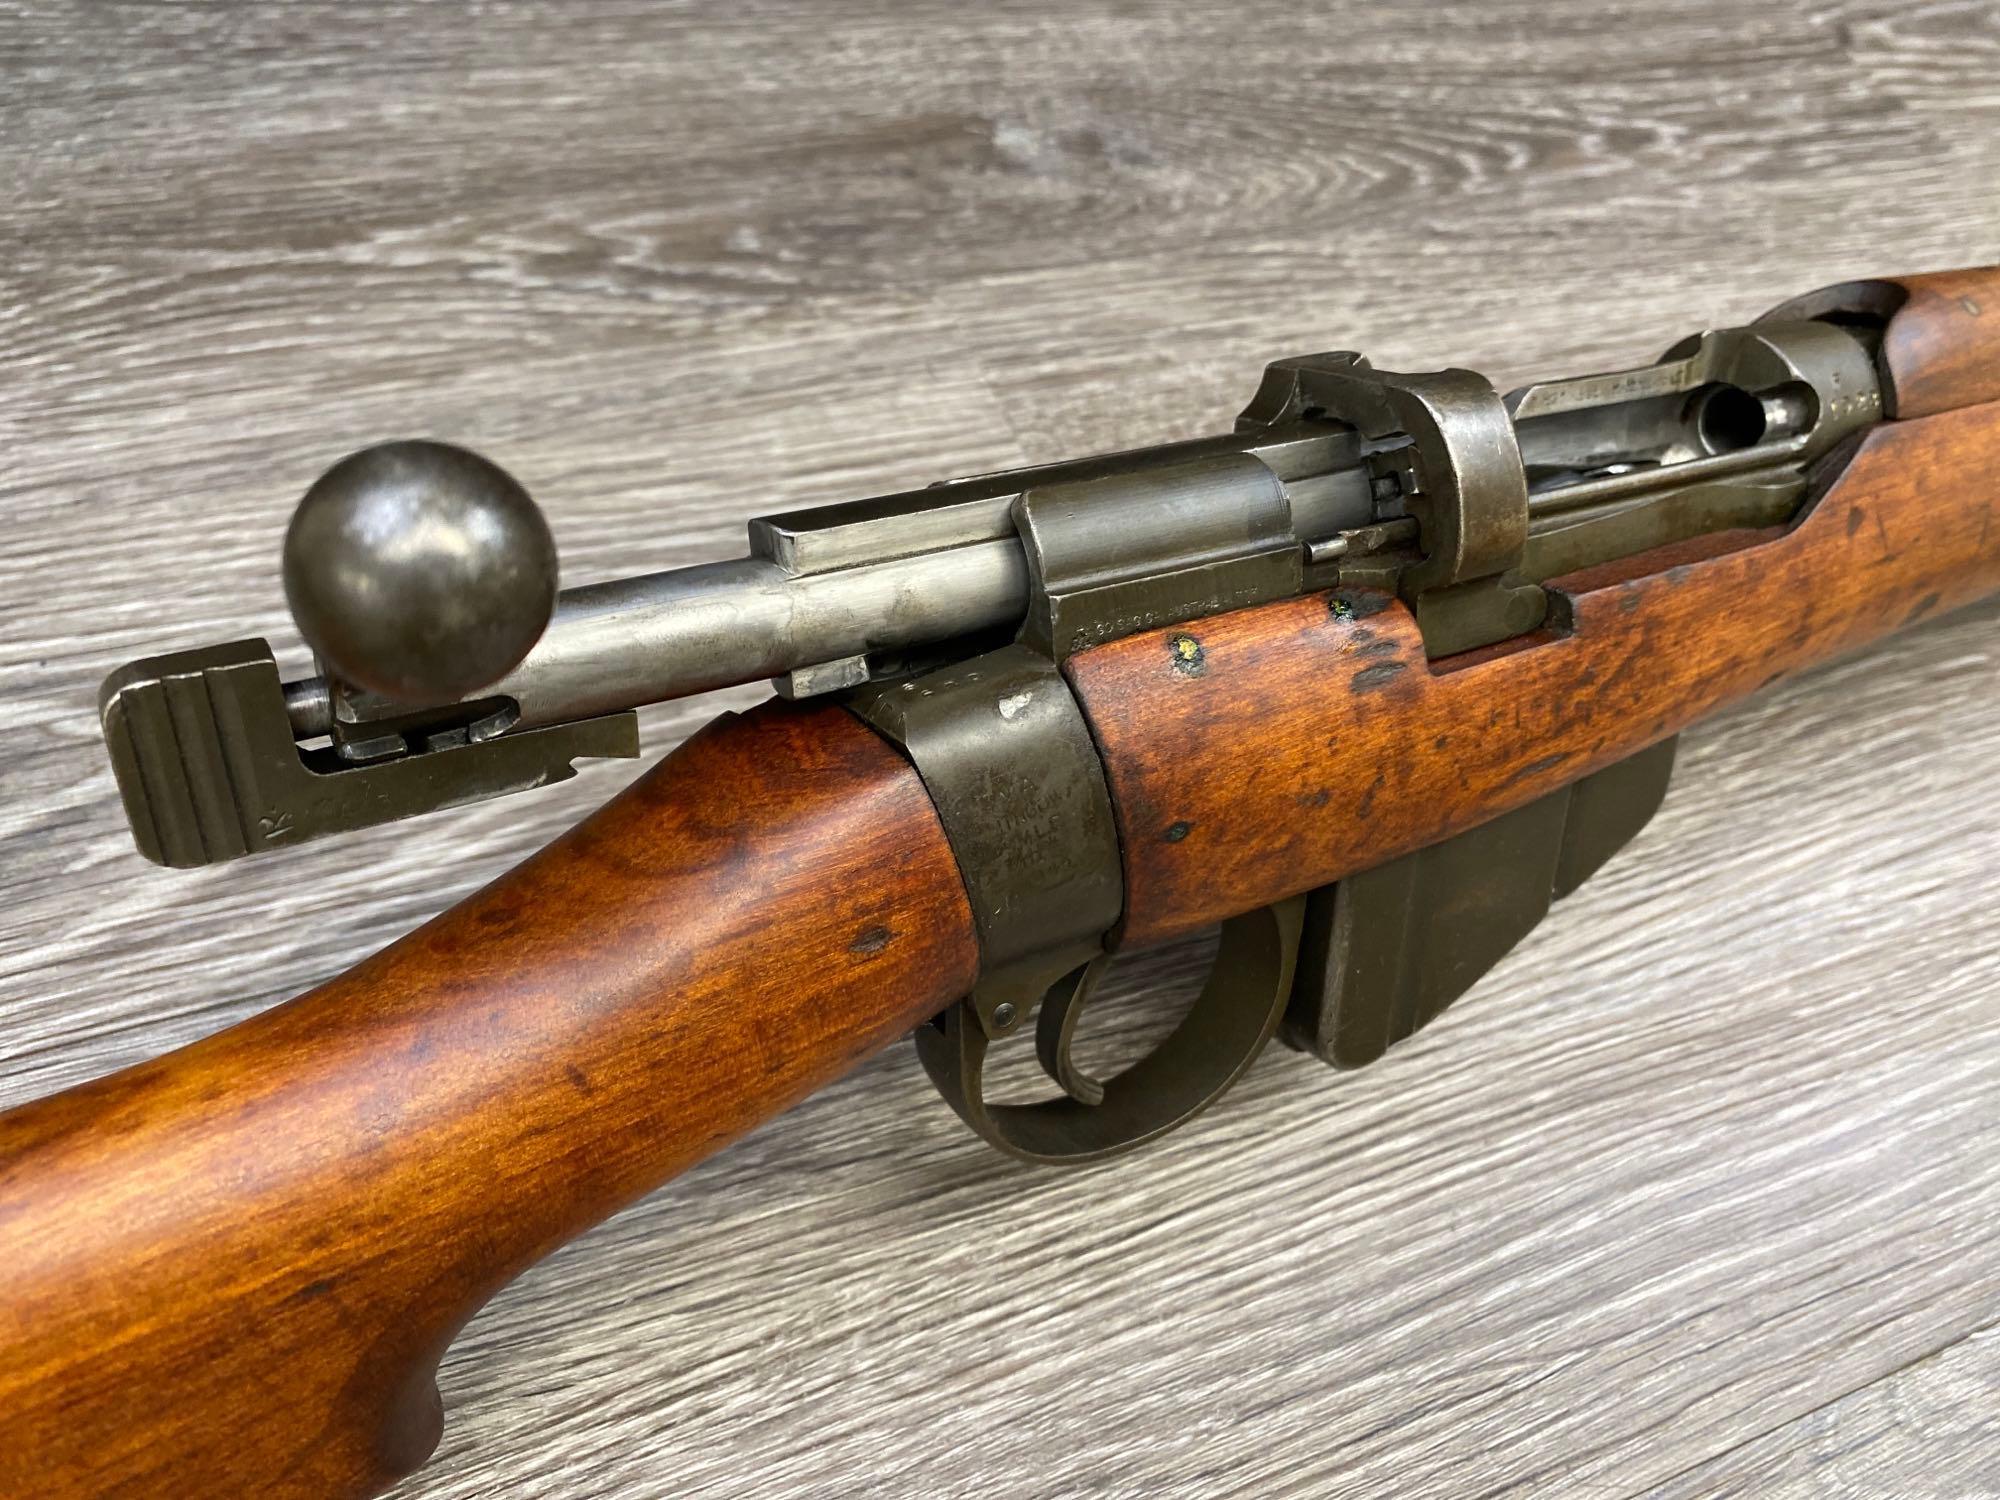 LEE ENFIELD NO. 1 MK III* .303 BRITISH BOLT-ACTION MILITARY RIFLE